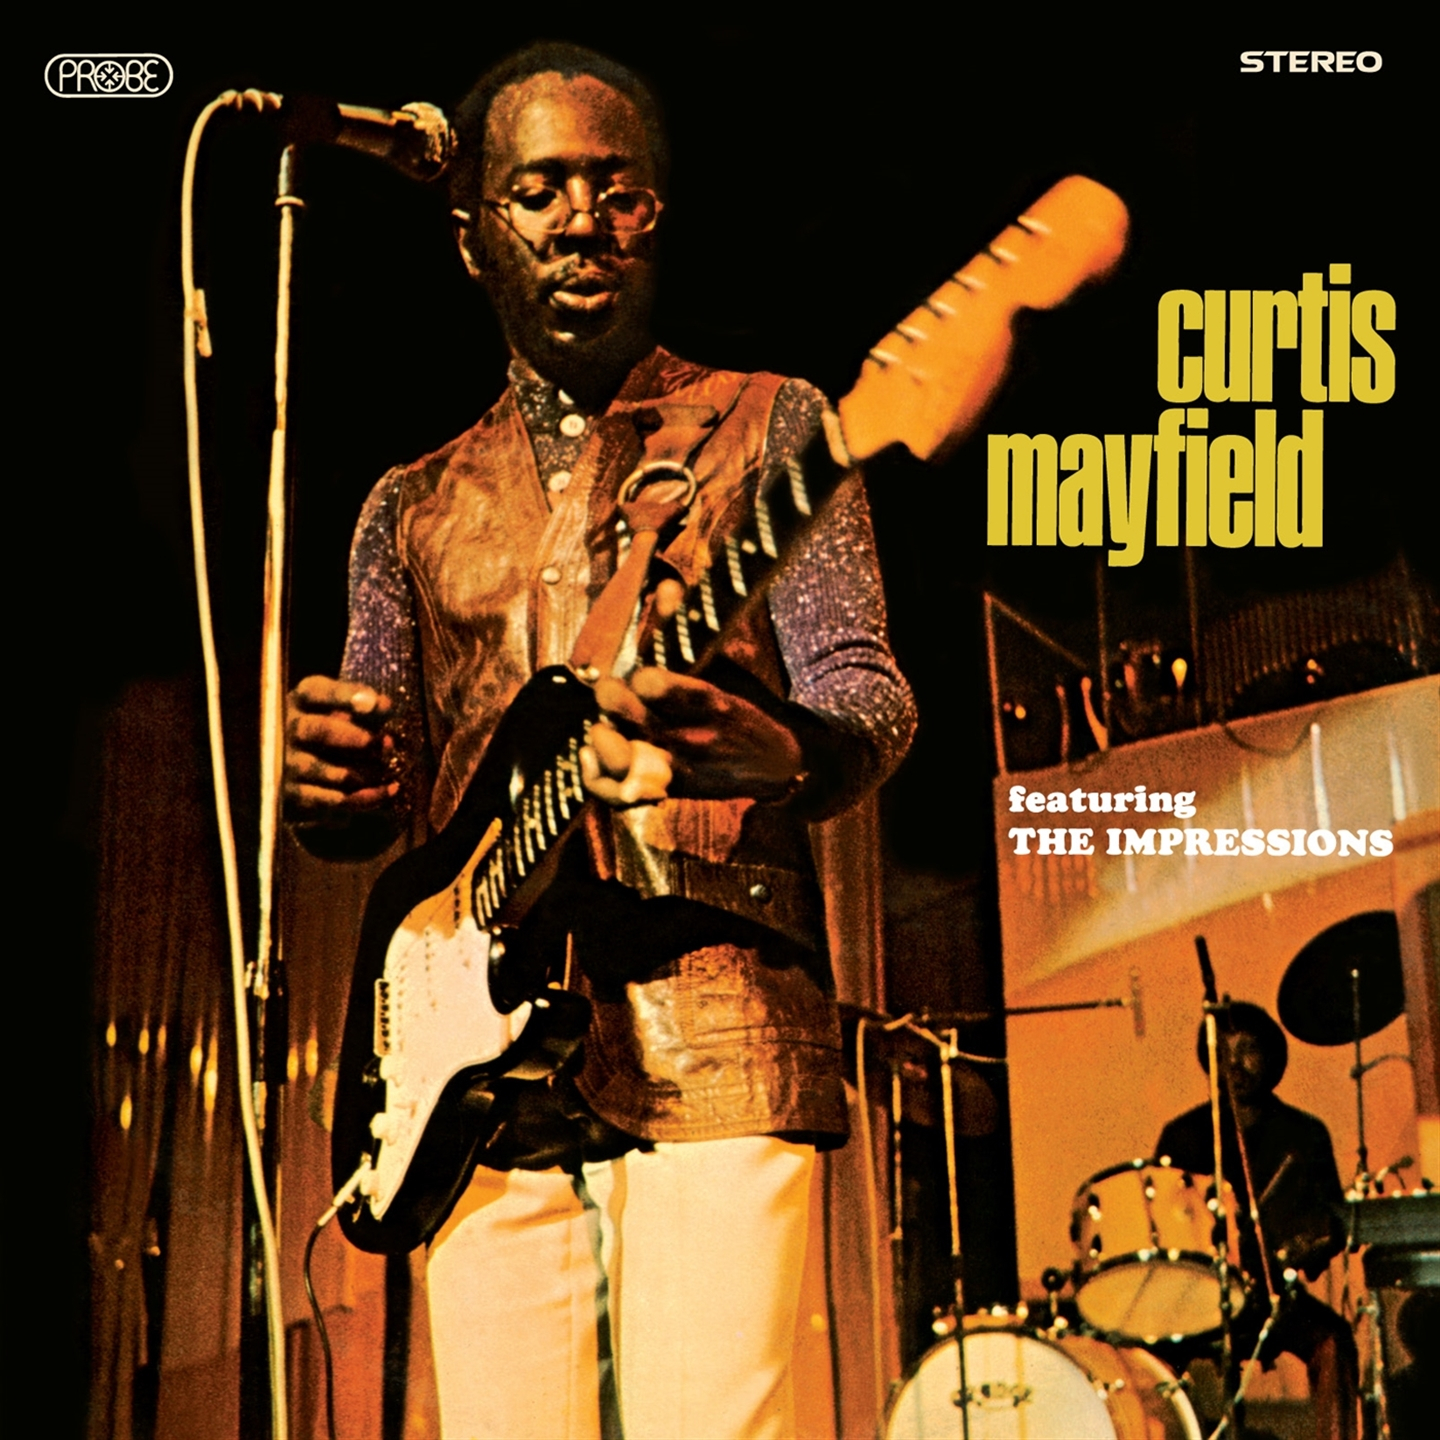 CURTIS MAYFIELD FEATURING THE IMPRESSIONS